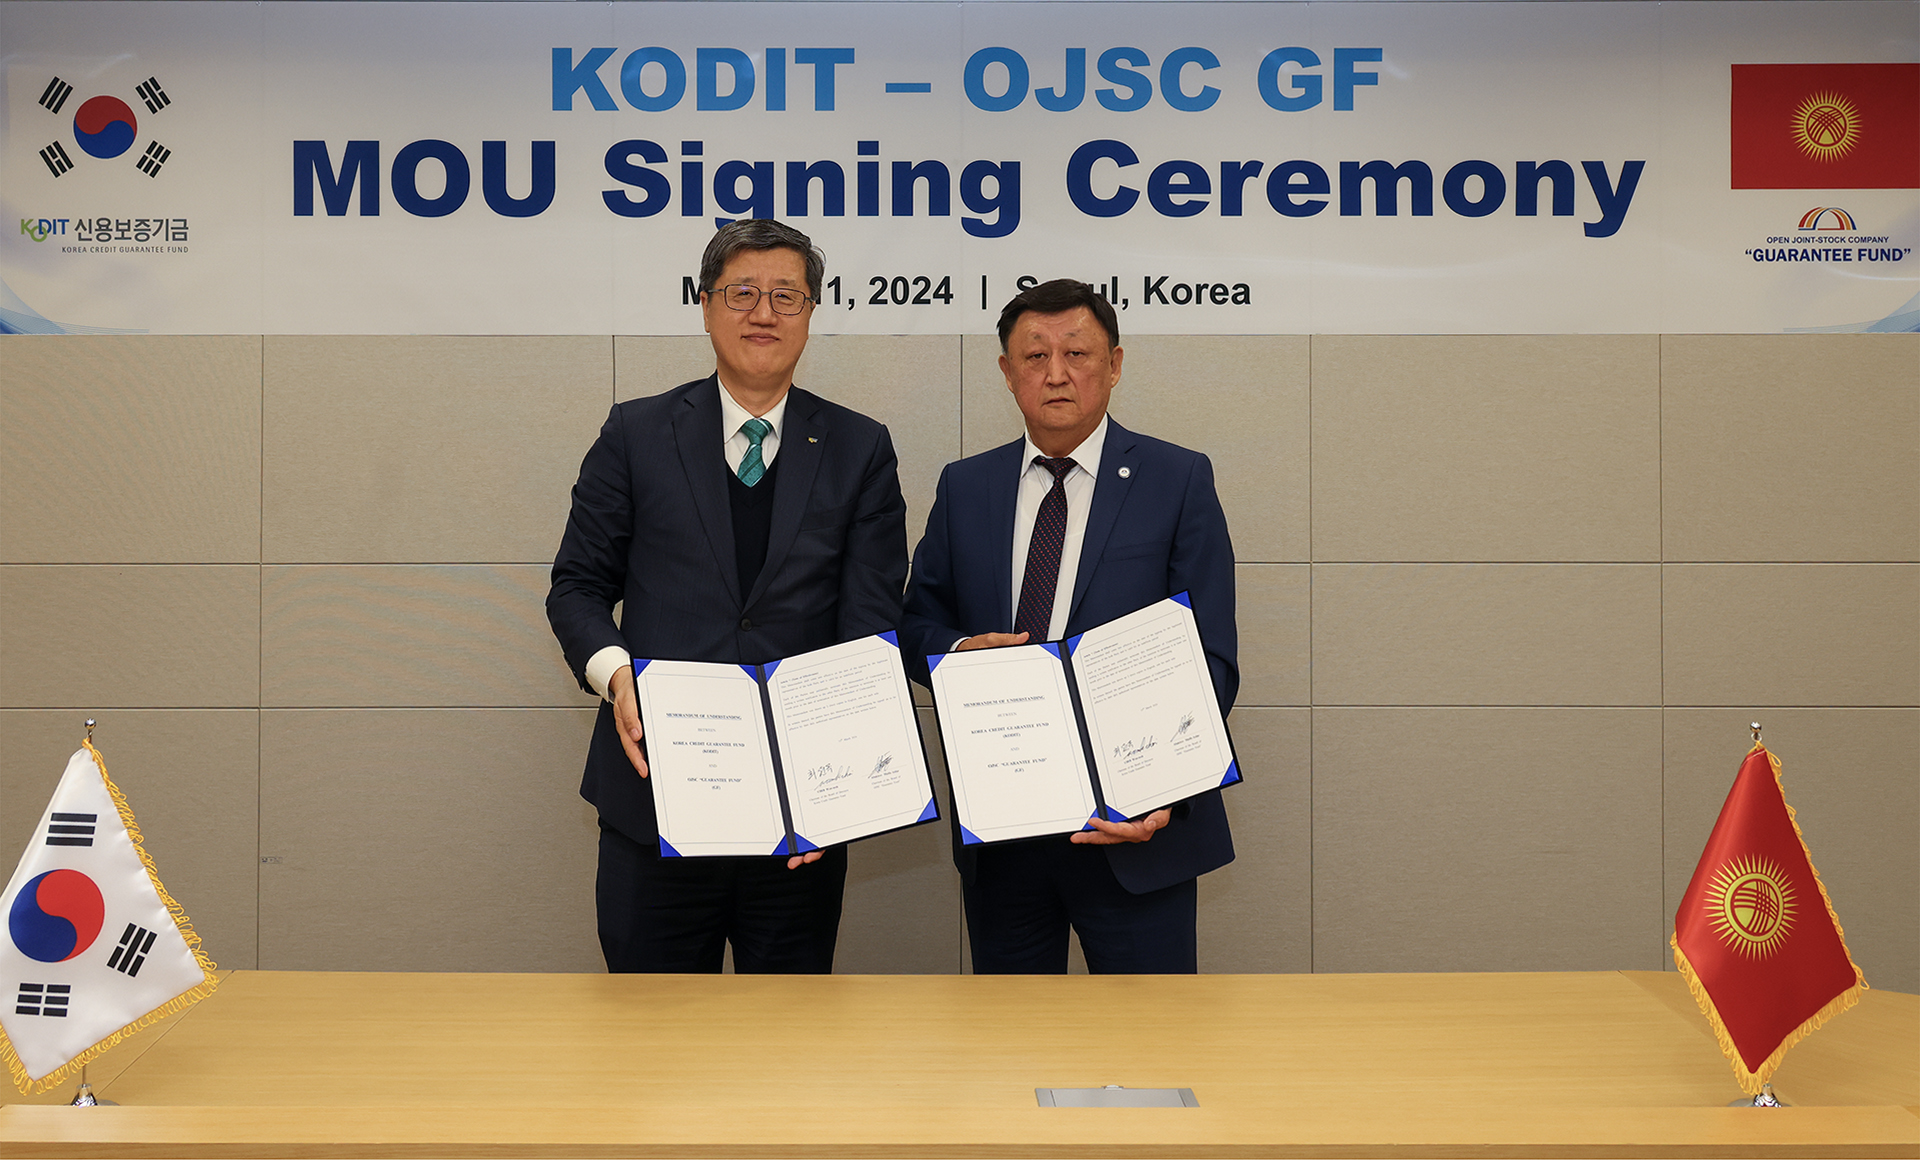 KODIT Signs an MOU with Kyrgyz Guarantee Fund on Deepening Mutual Cooperation (March 12, 2024) images